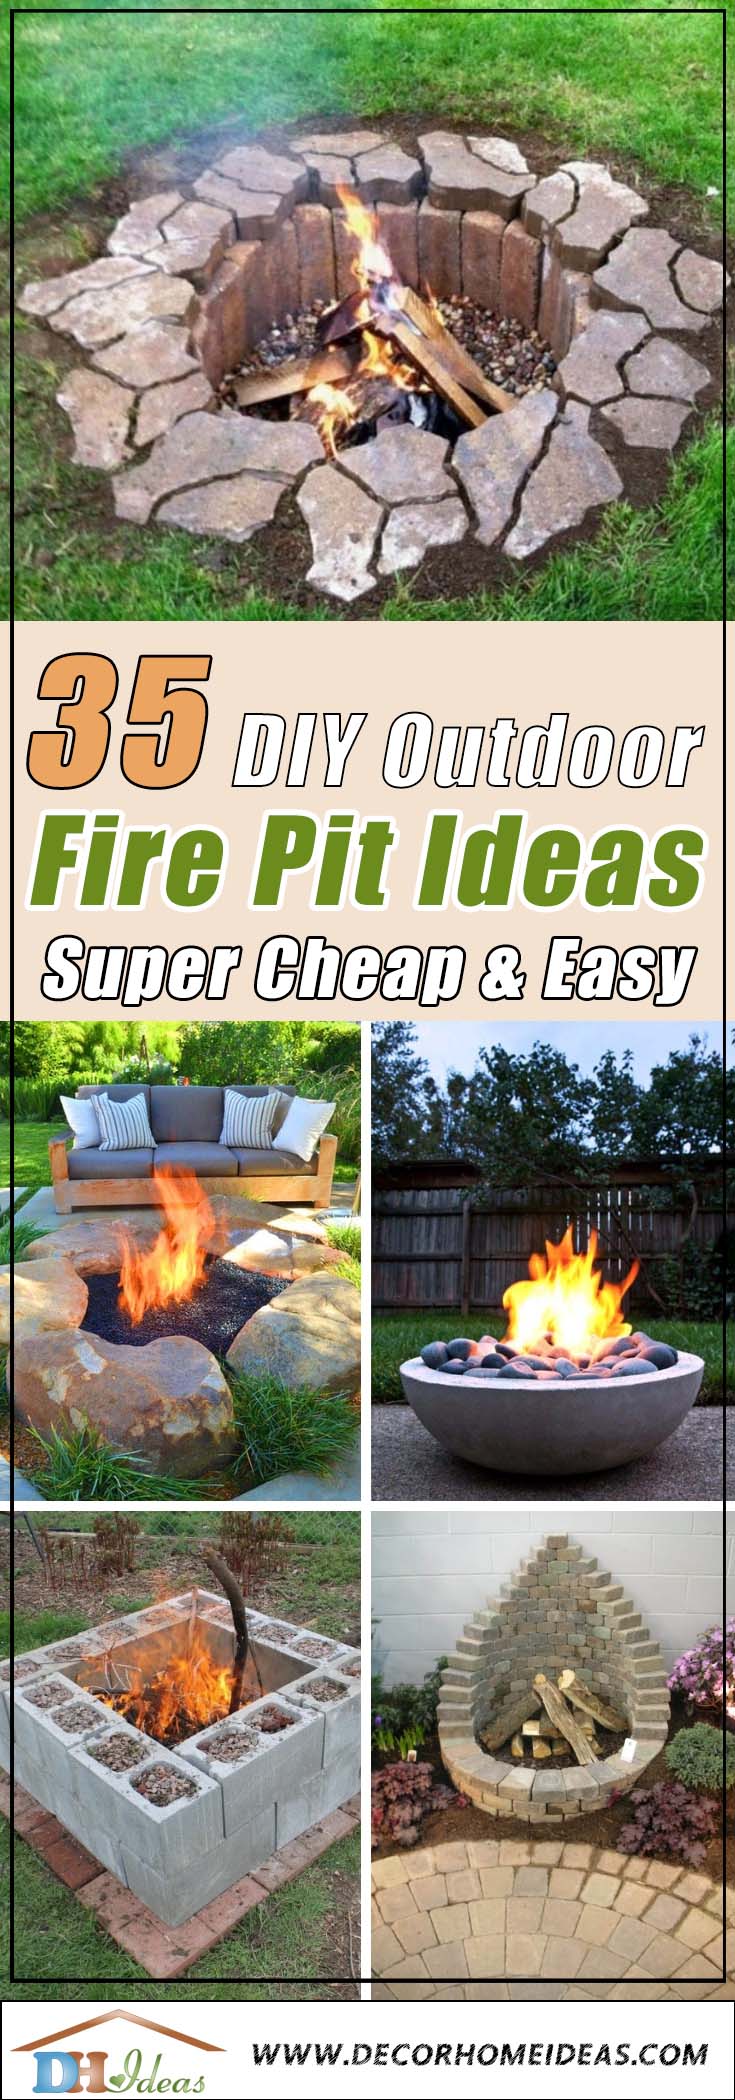 35 Easy To Do Fire Pit Ideas And, Easy To Build Outdoor Fire Pit